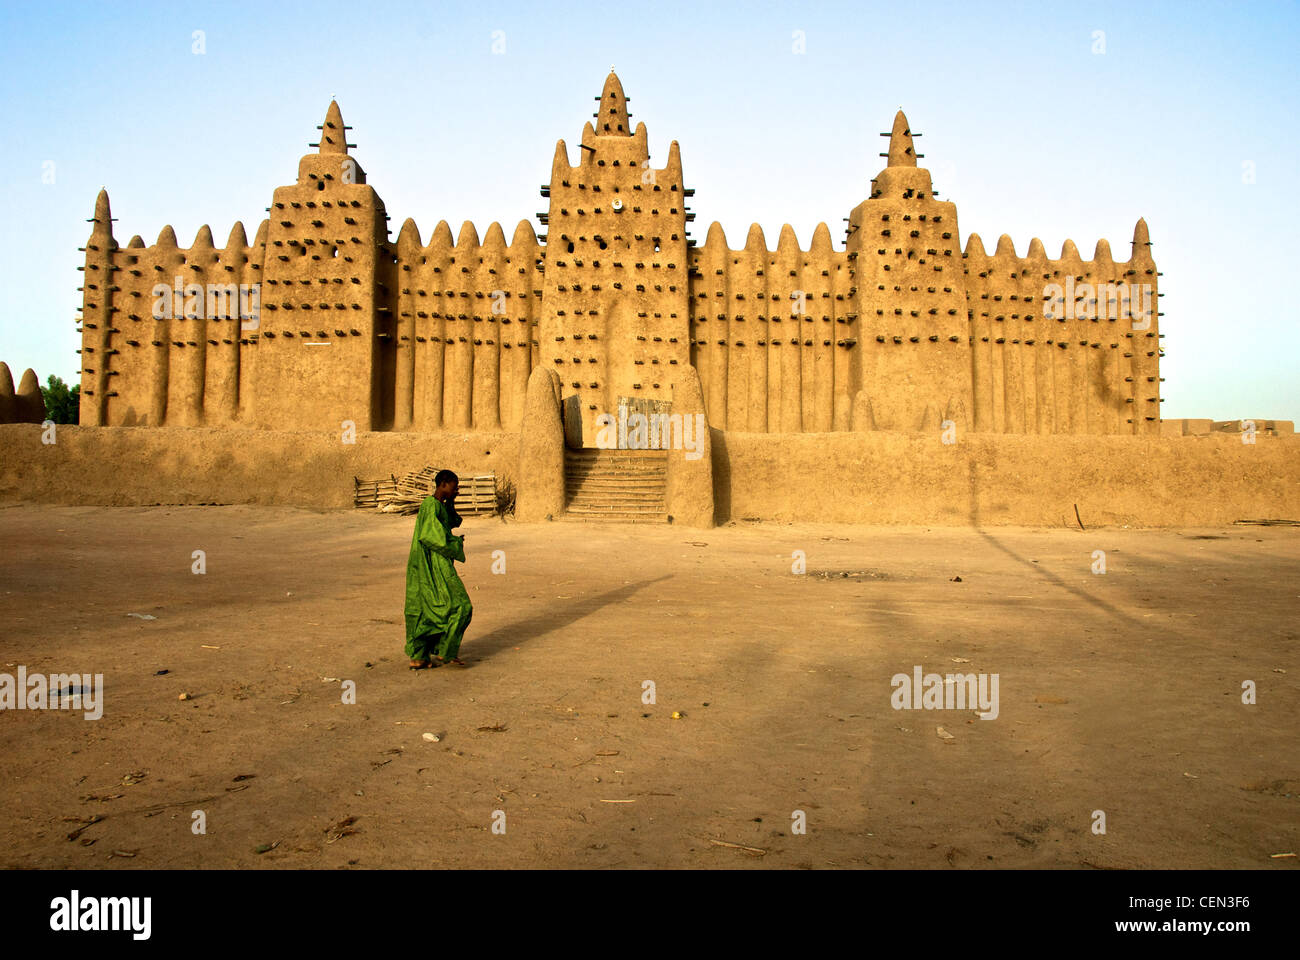 A man walks past the Great Mosque of Djenne in Djenne, Mali Stock Photo